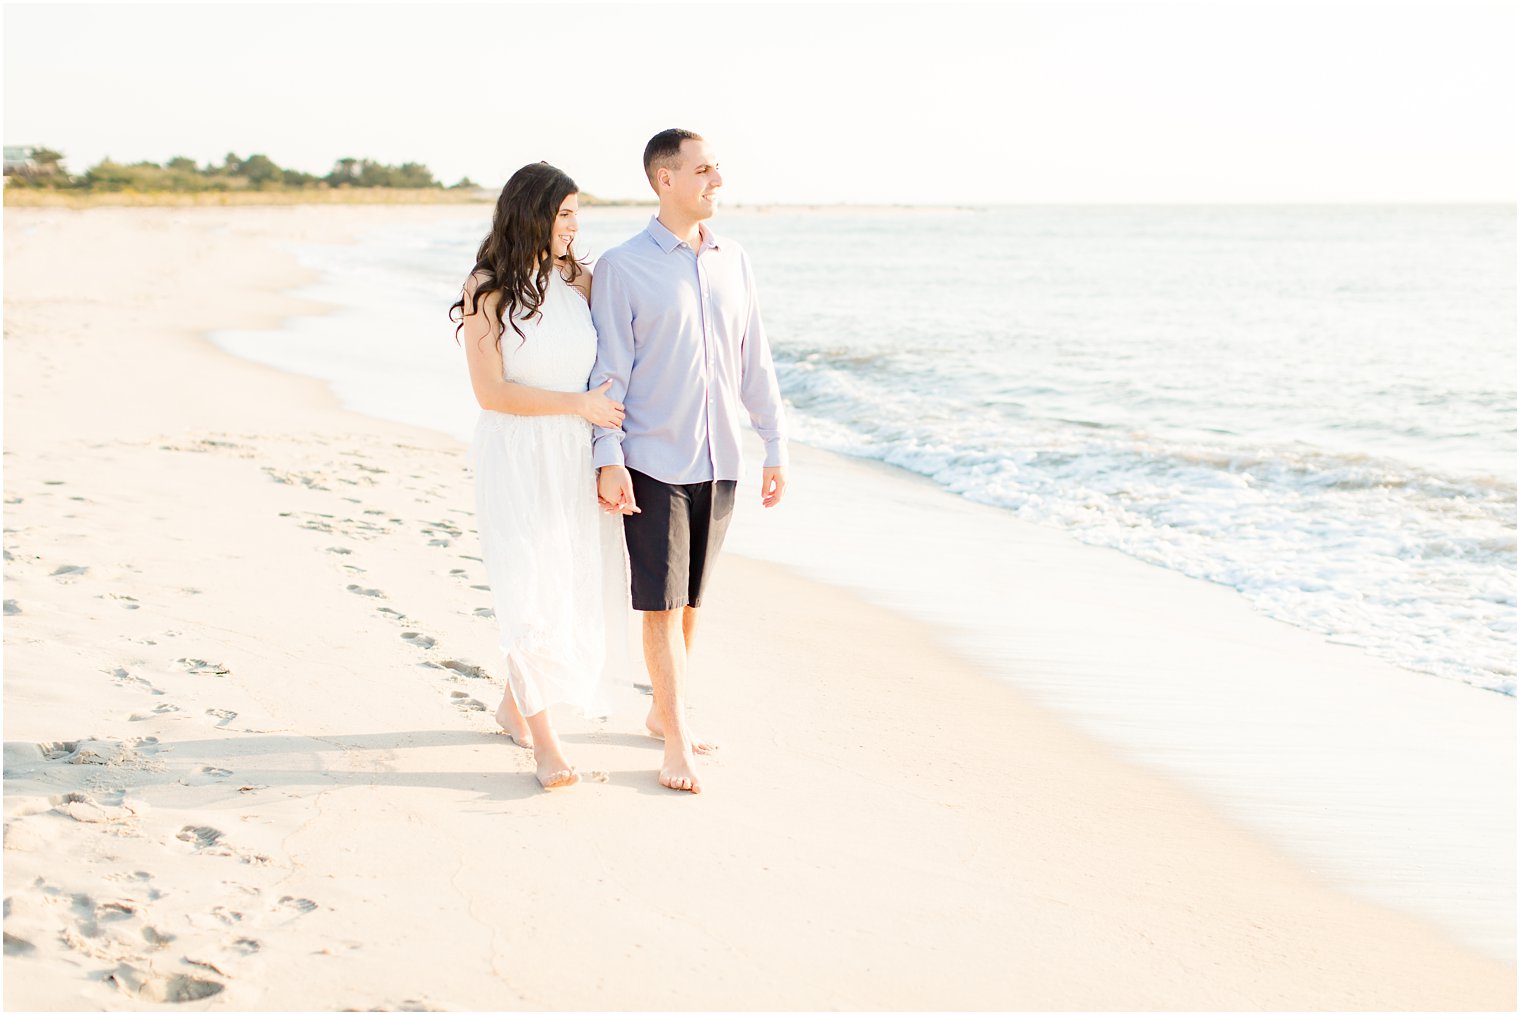 Sunset Beach engagement session in Cape May